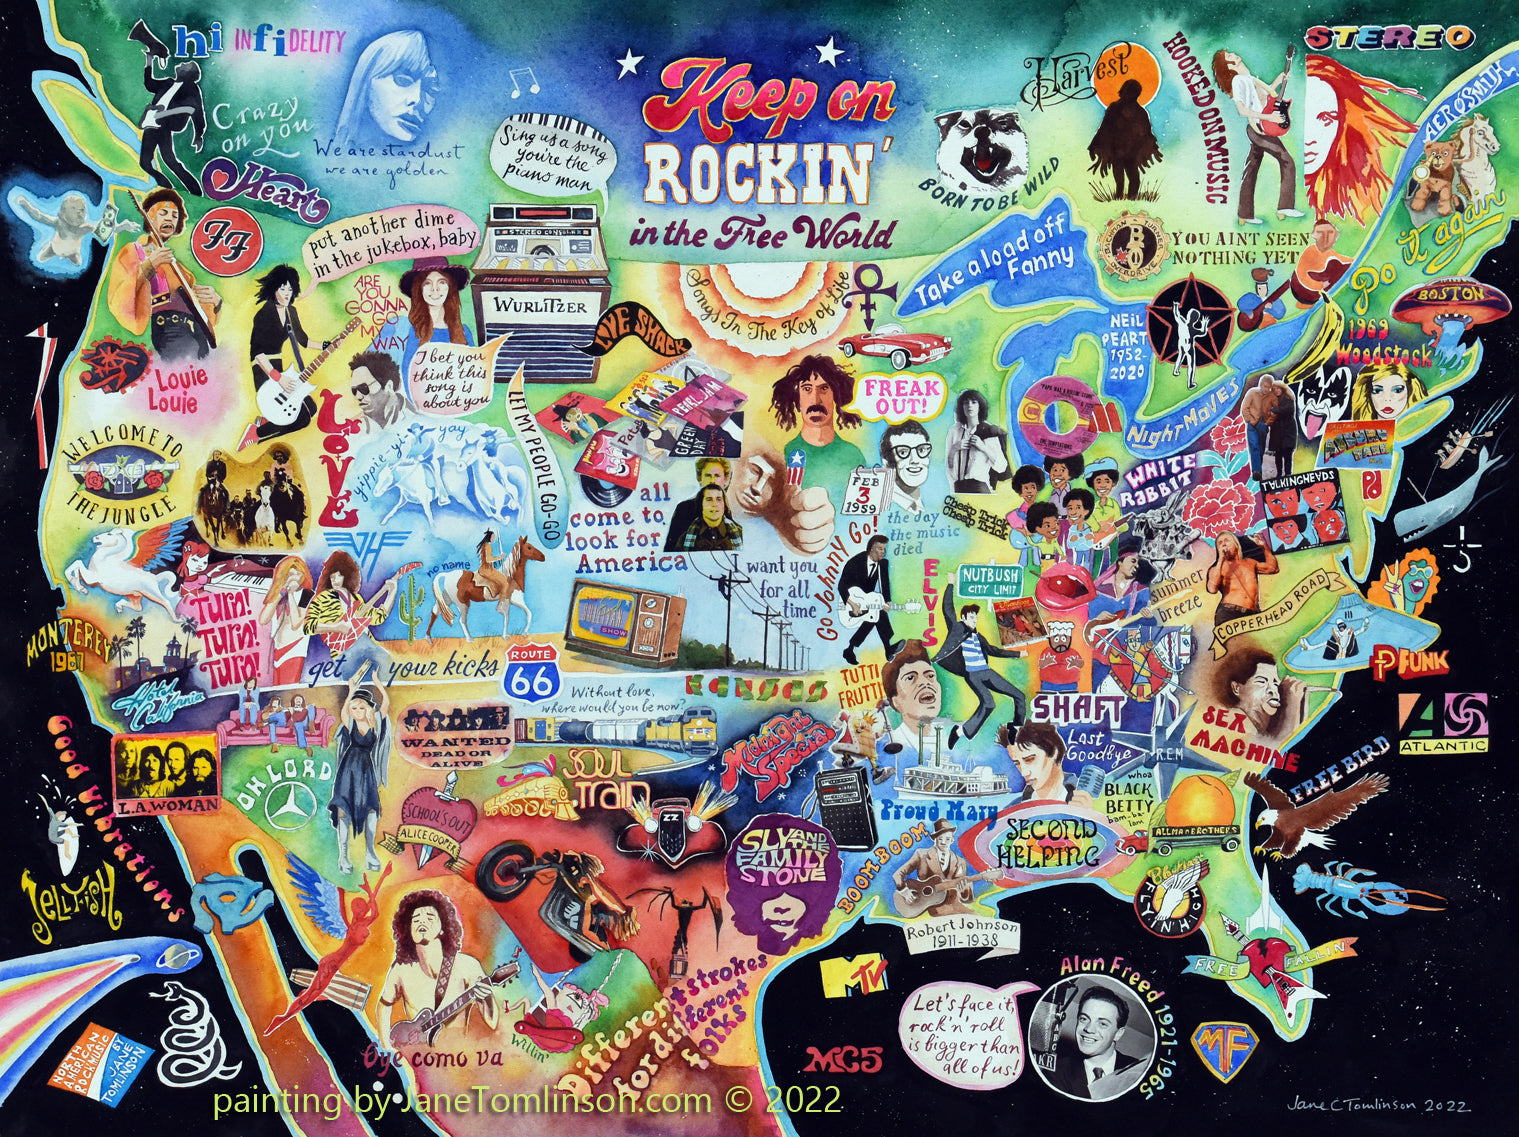 North American Rock Music Map by Jane Tomlinson